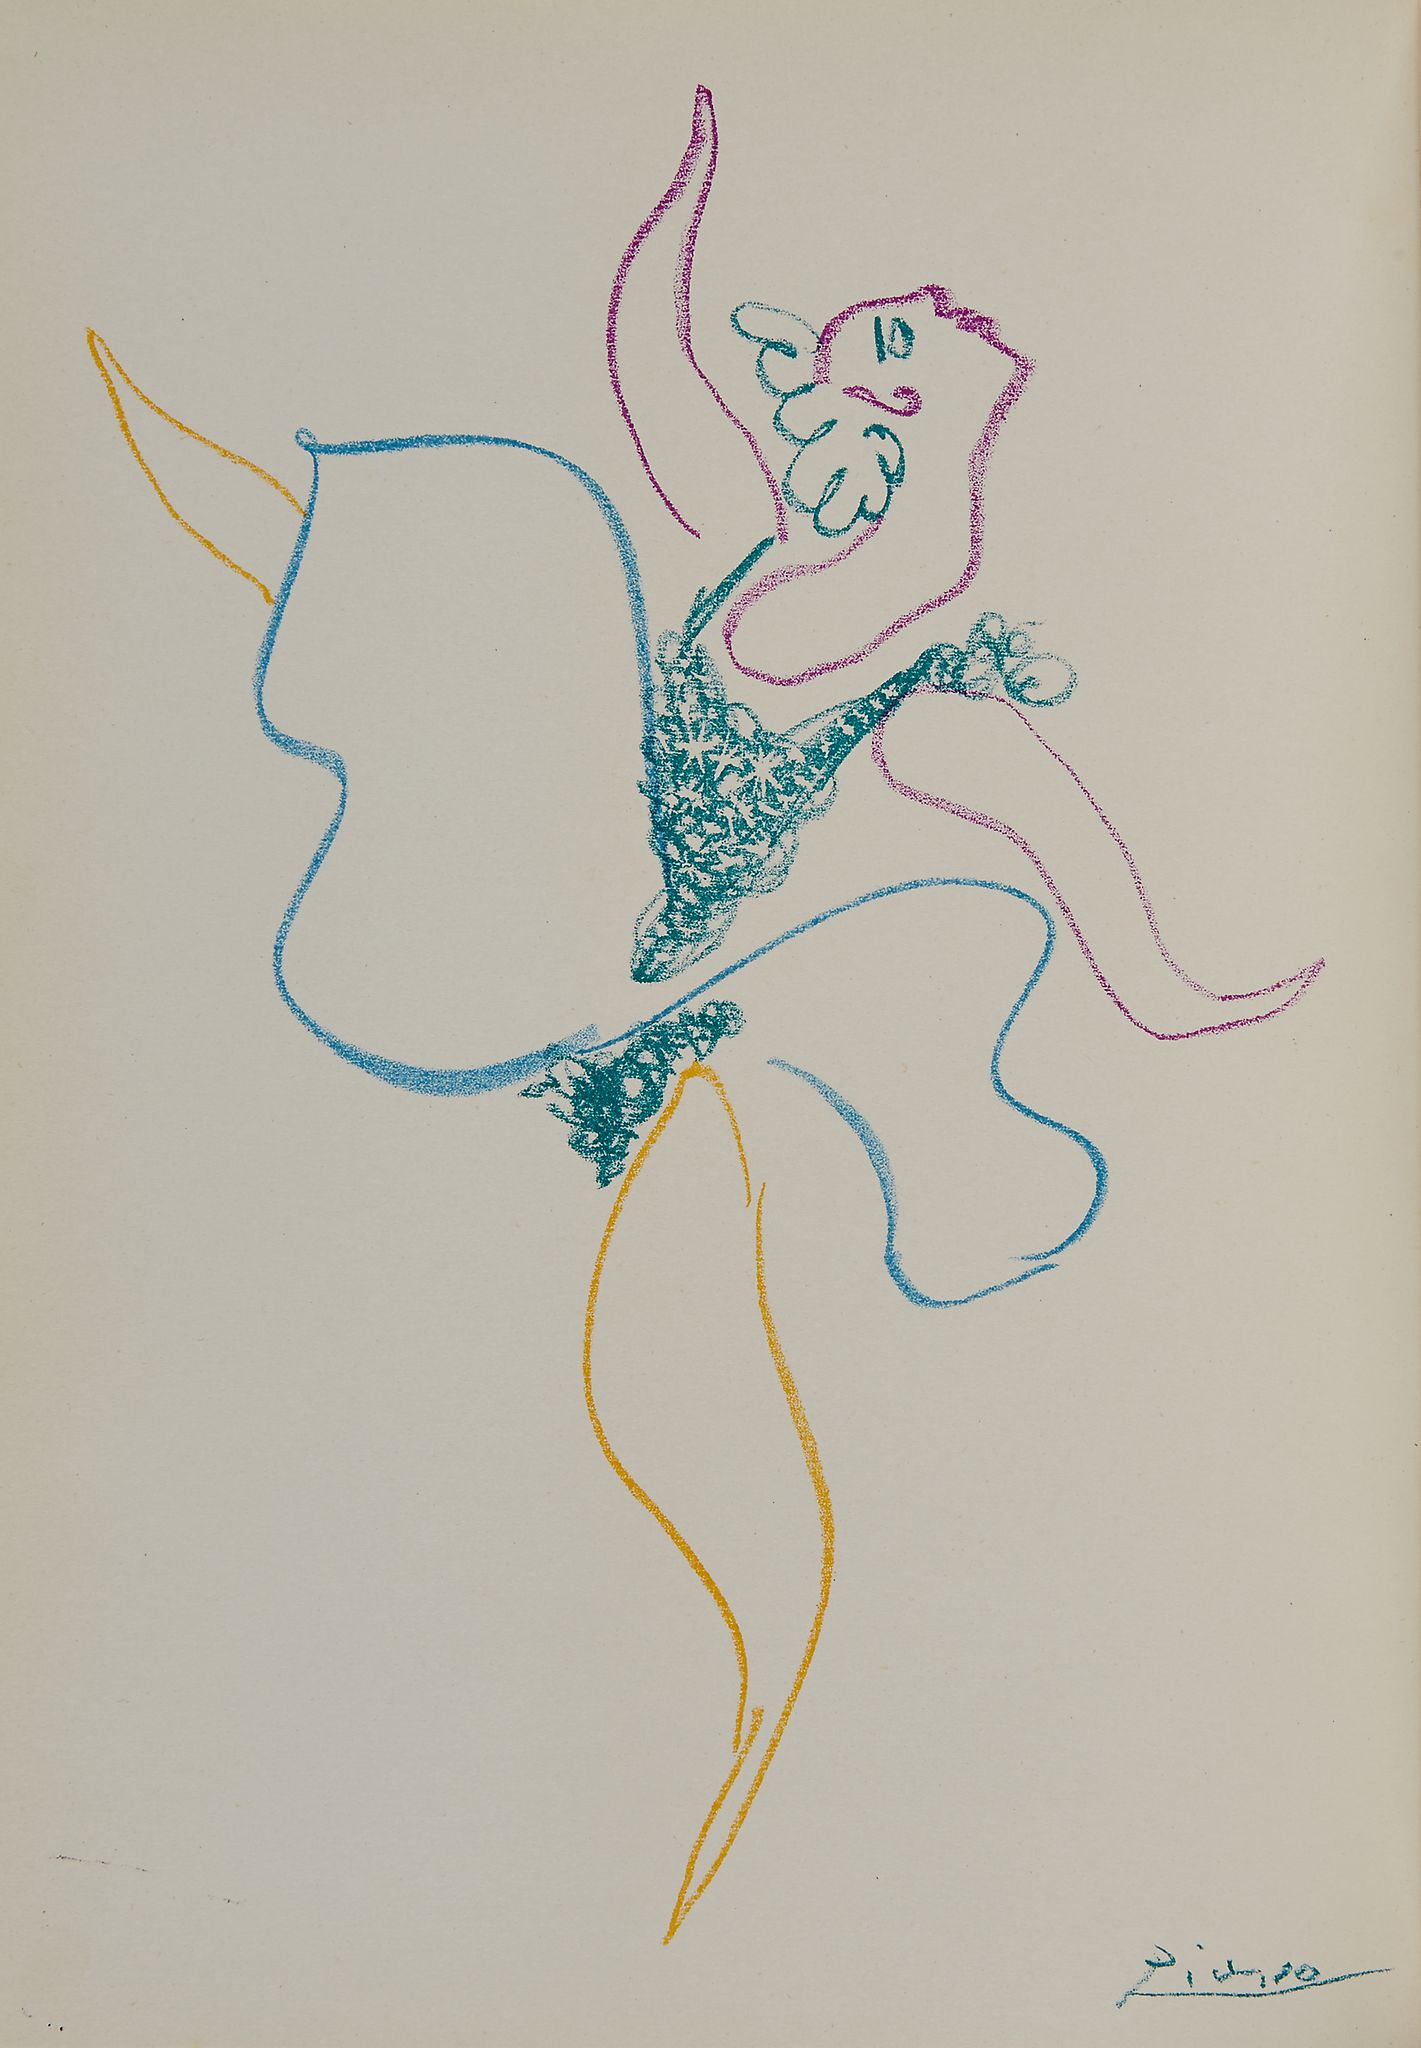 Pablo Picasso (1881-1973) - Le Ballet the book, 1954, comprising one lithograph printed in